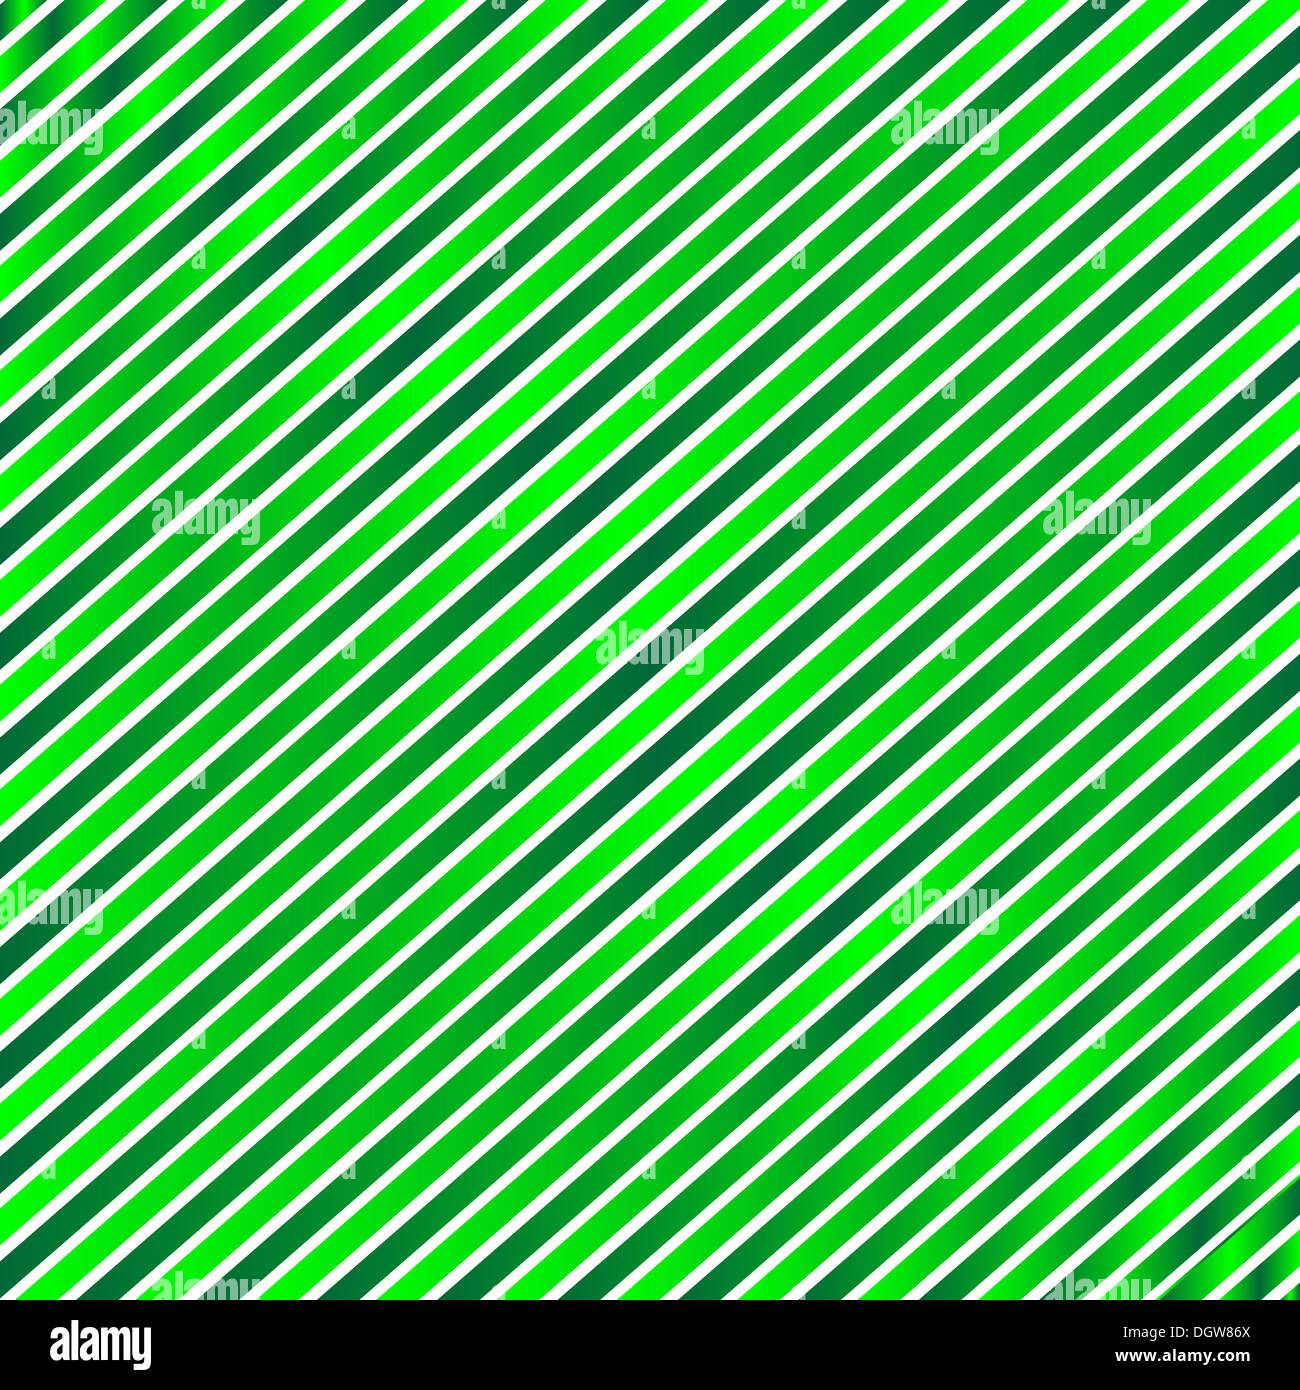 Striped linear green background Stock Photo - Alamy